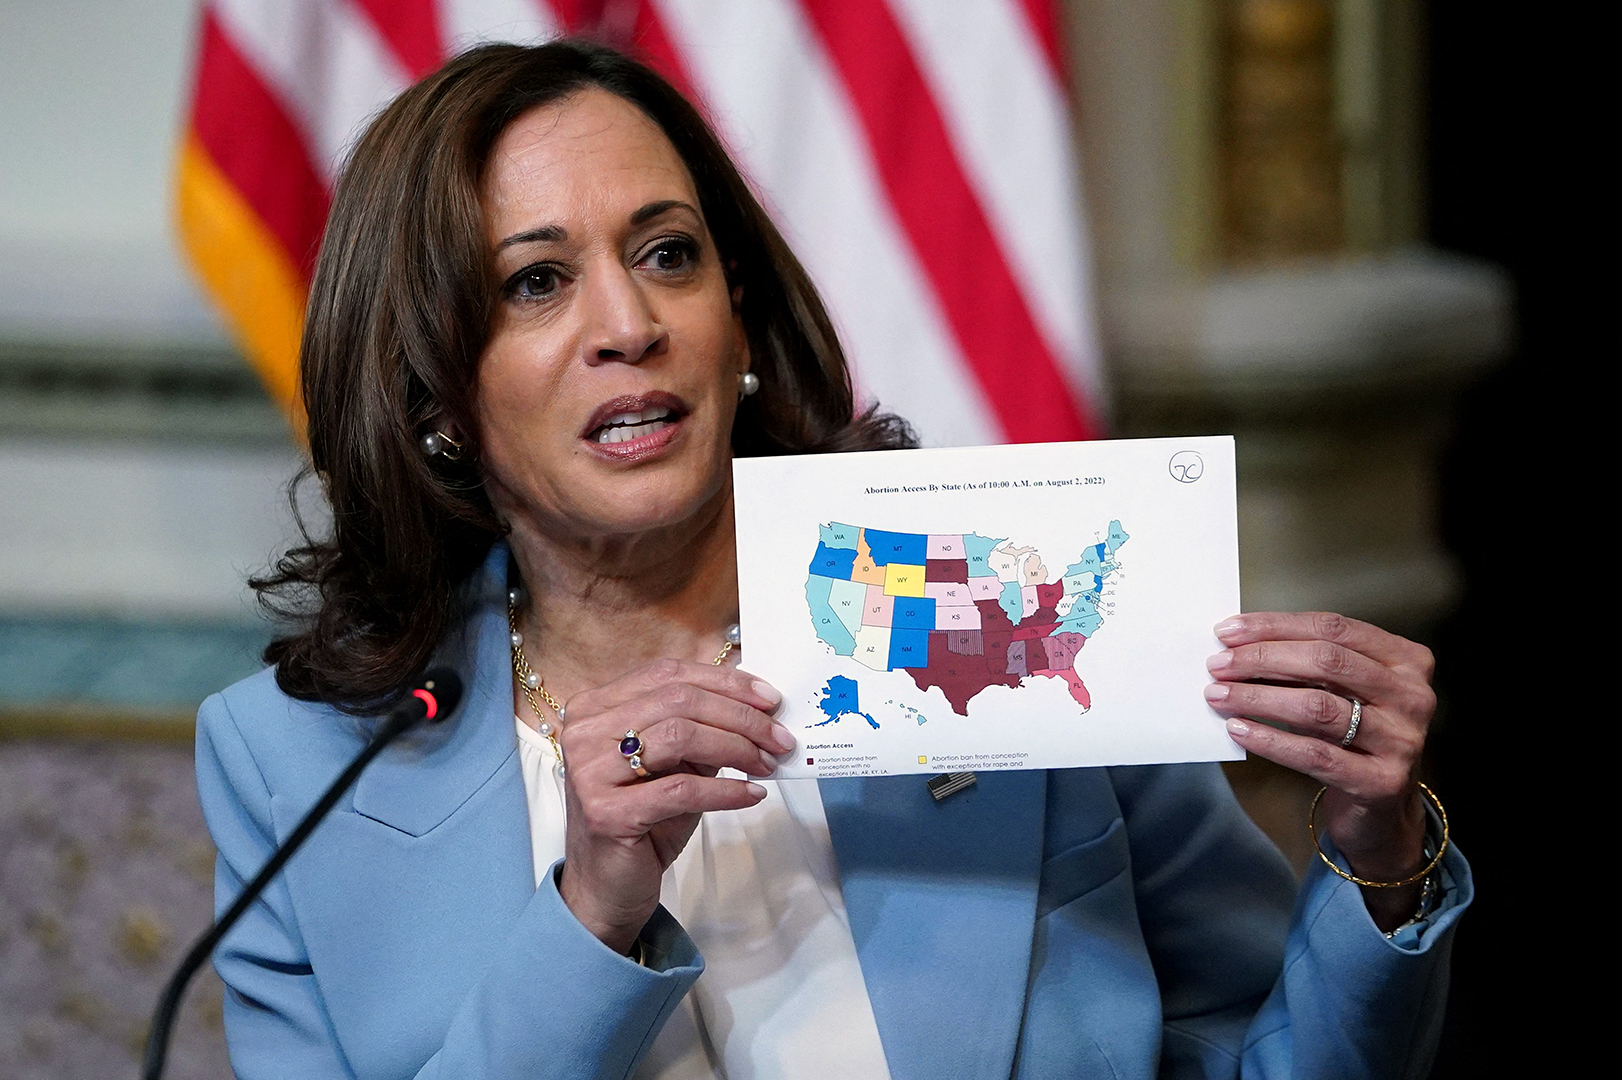 Vice President Kamala Harris holds up a map displaying abortion access in the United States, while delivering remarks during the first meeting of the interagency Task Force on Reproductive Healthcare Access in the Indian Treaty Room of the Eisenhower Executive Office Building, next to the White House, in Washington, DC, on August 3, 2022.